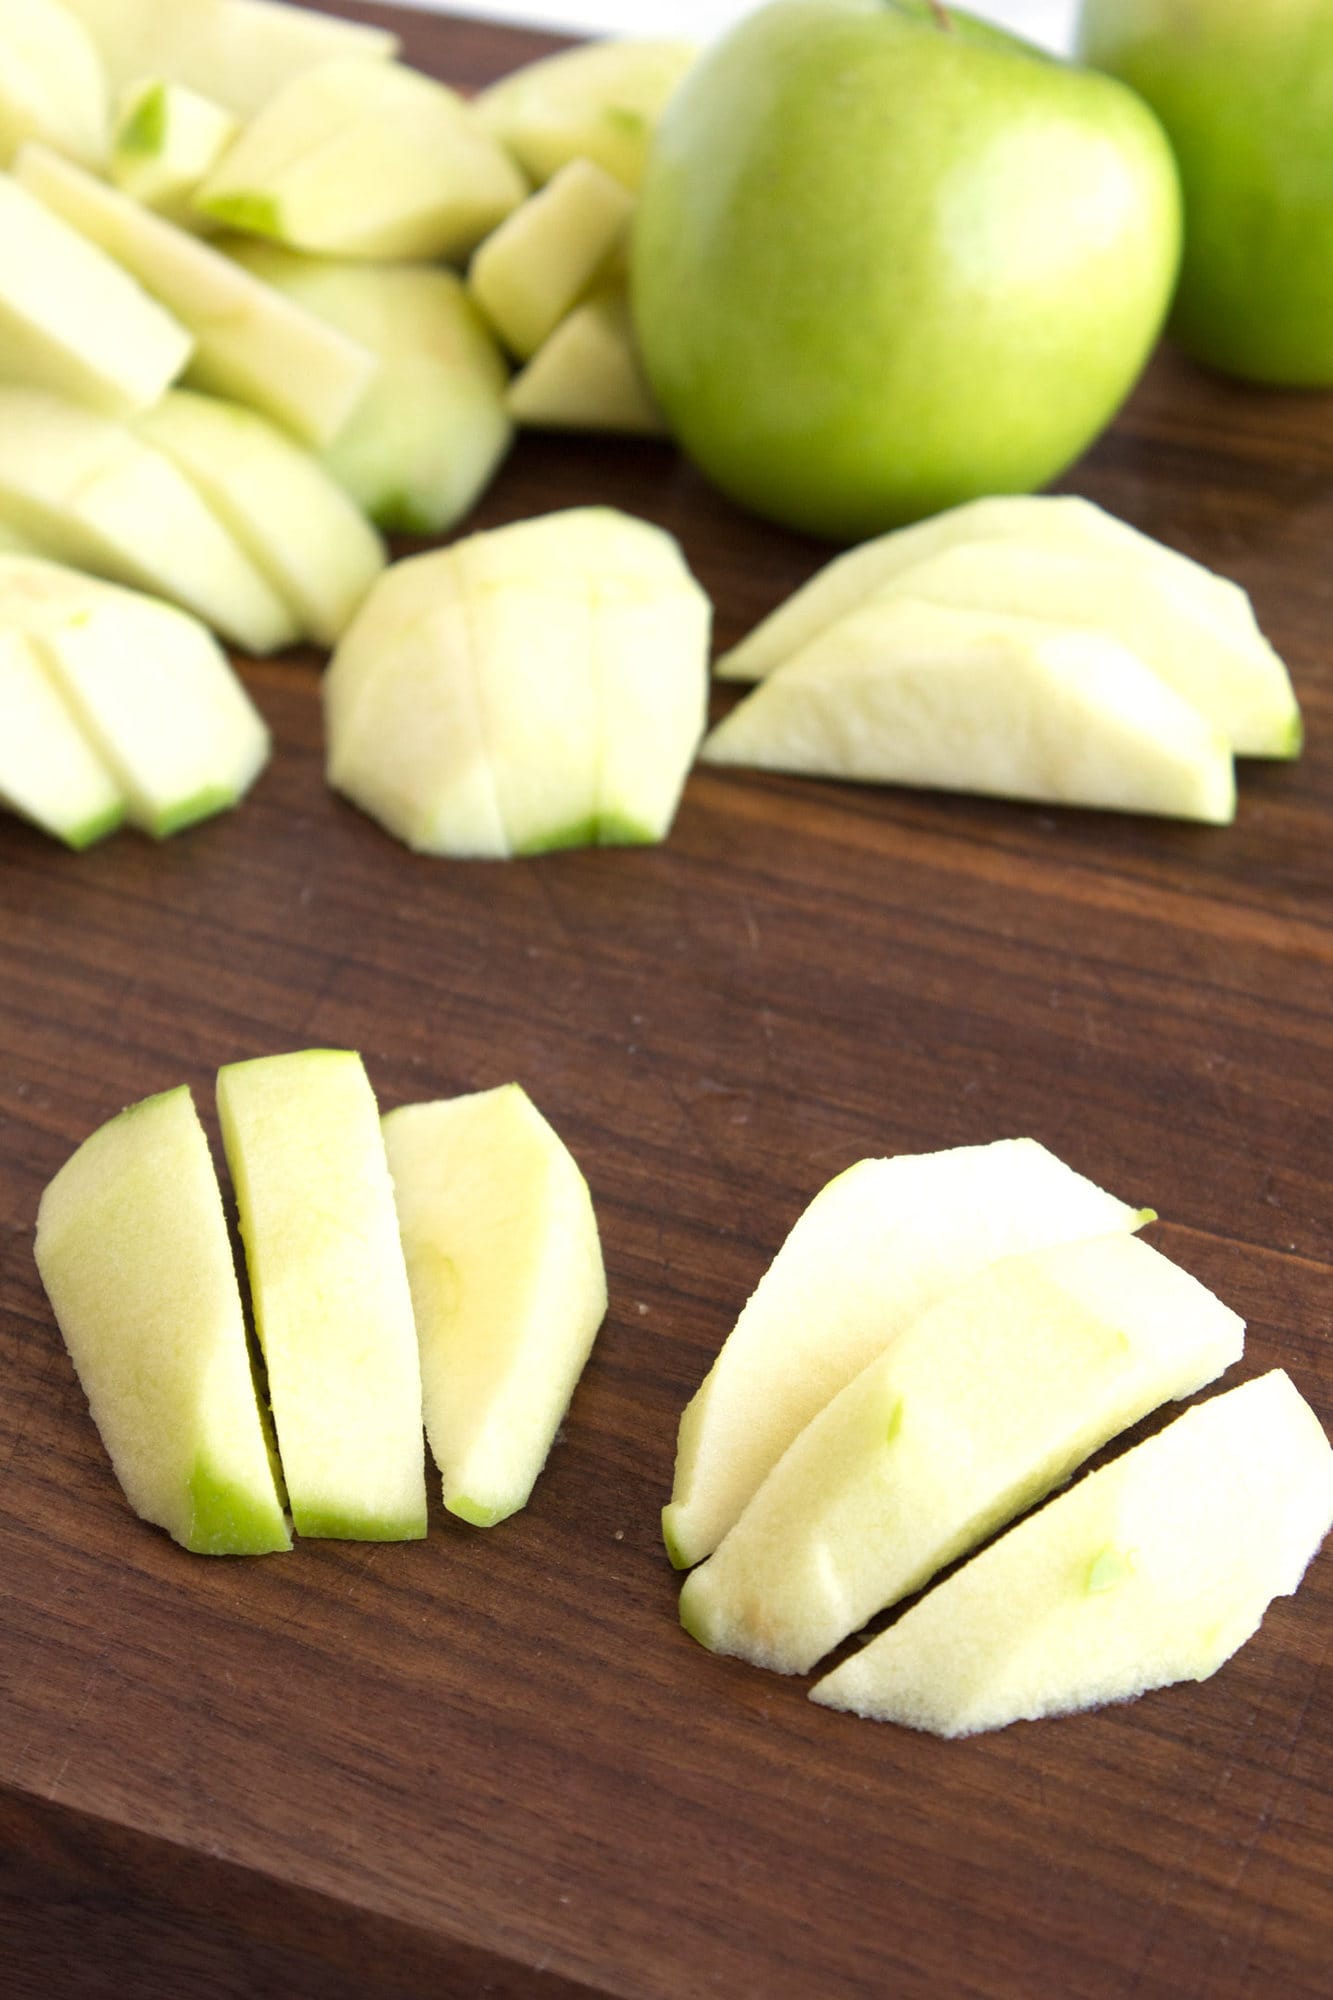 Sliced granny smith apples on cutting board